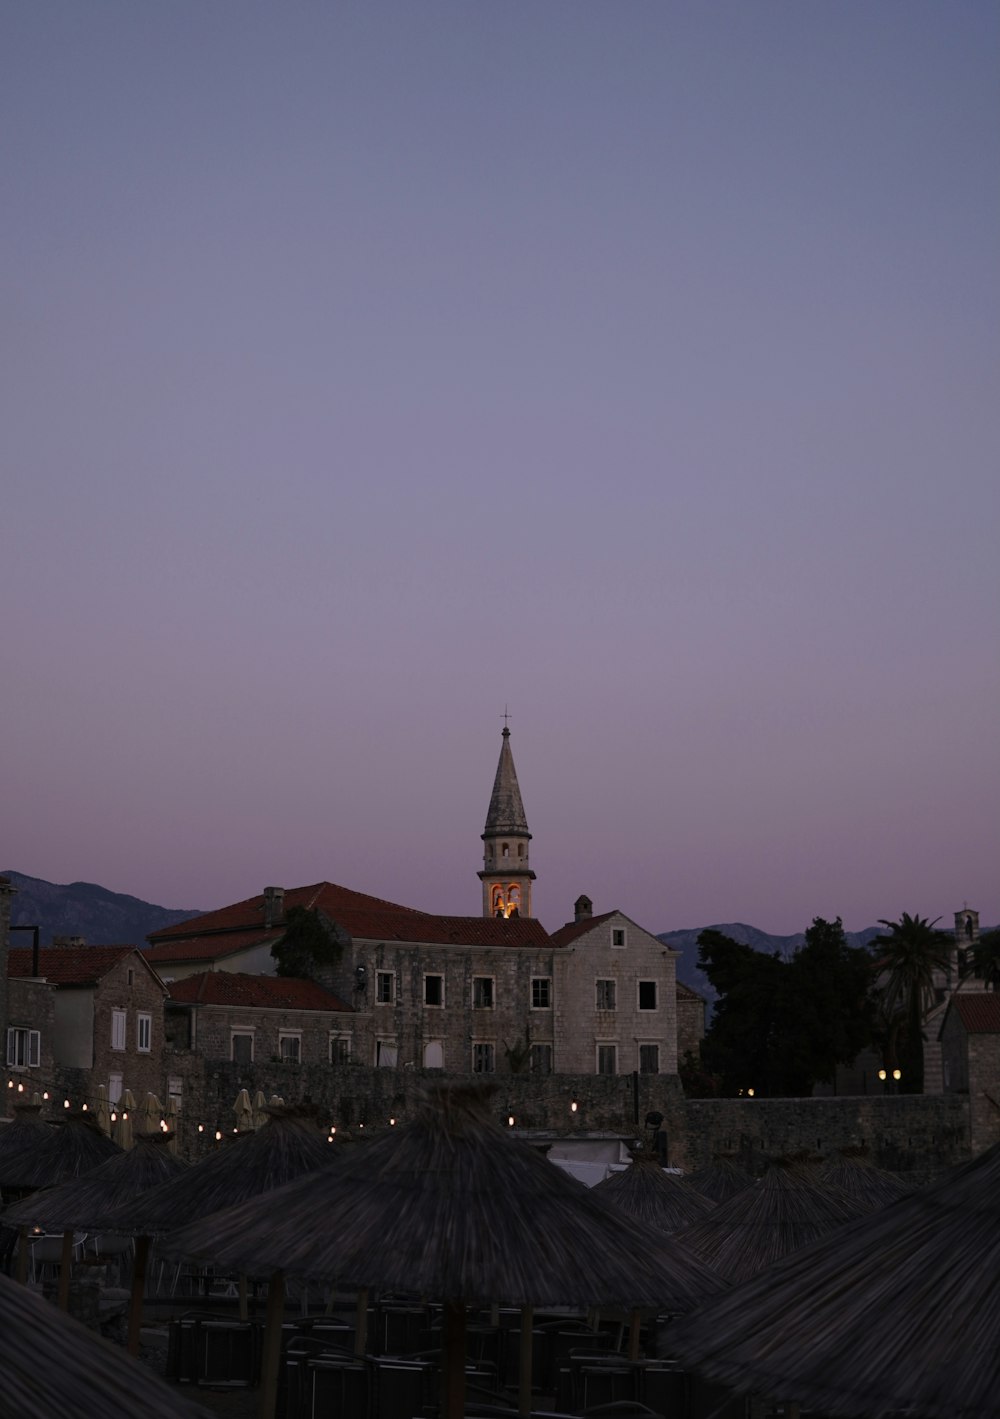 a building with a clock tower at dusk